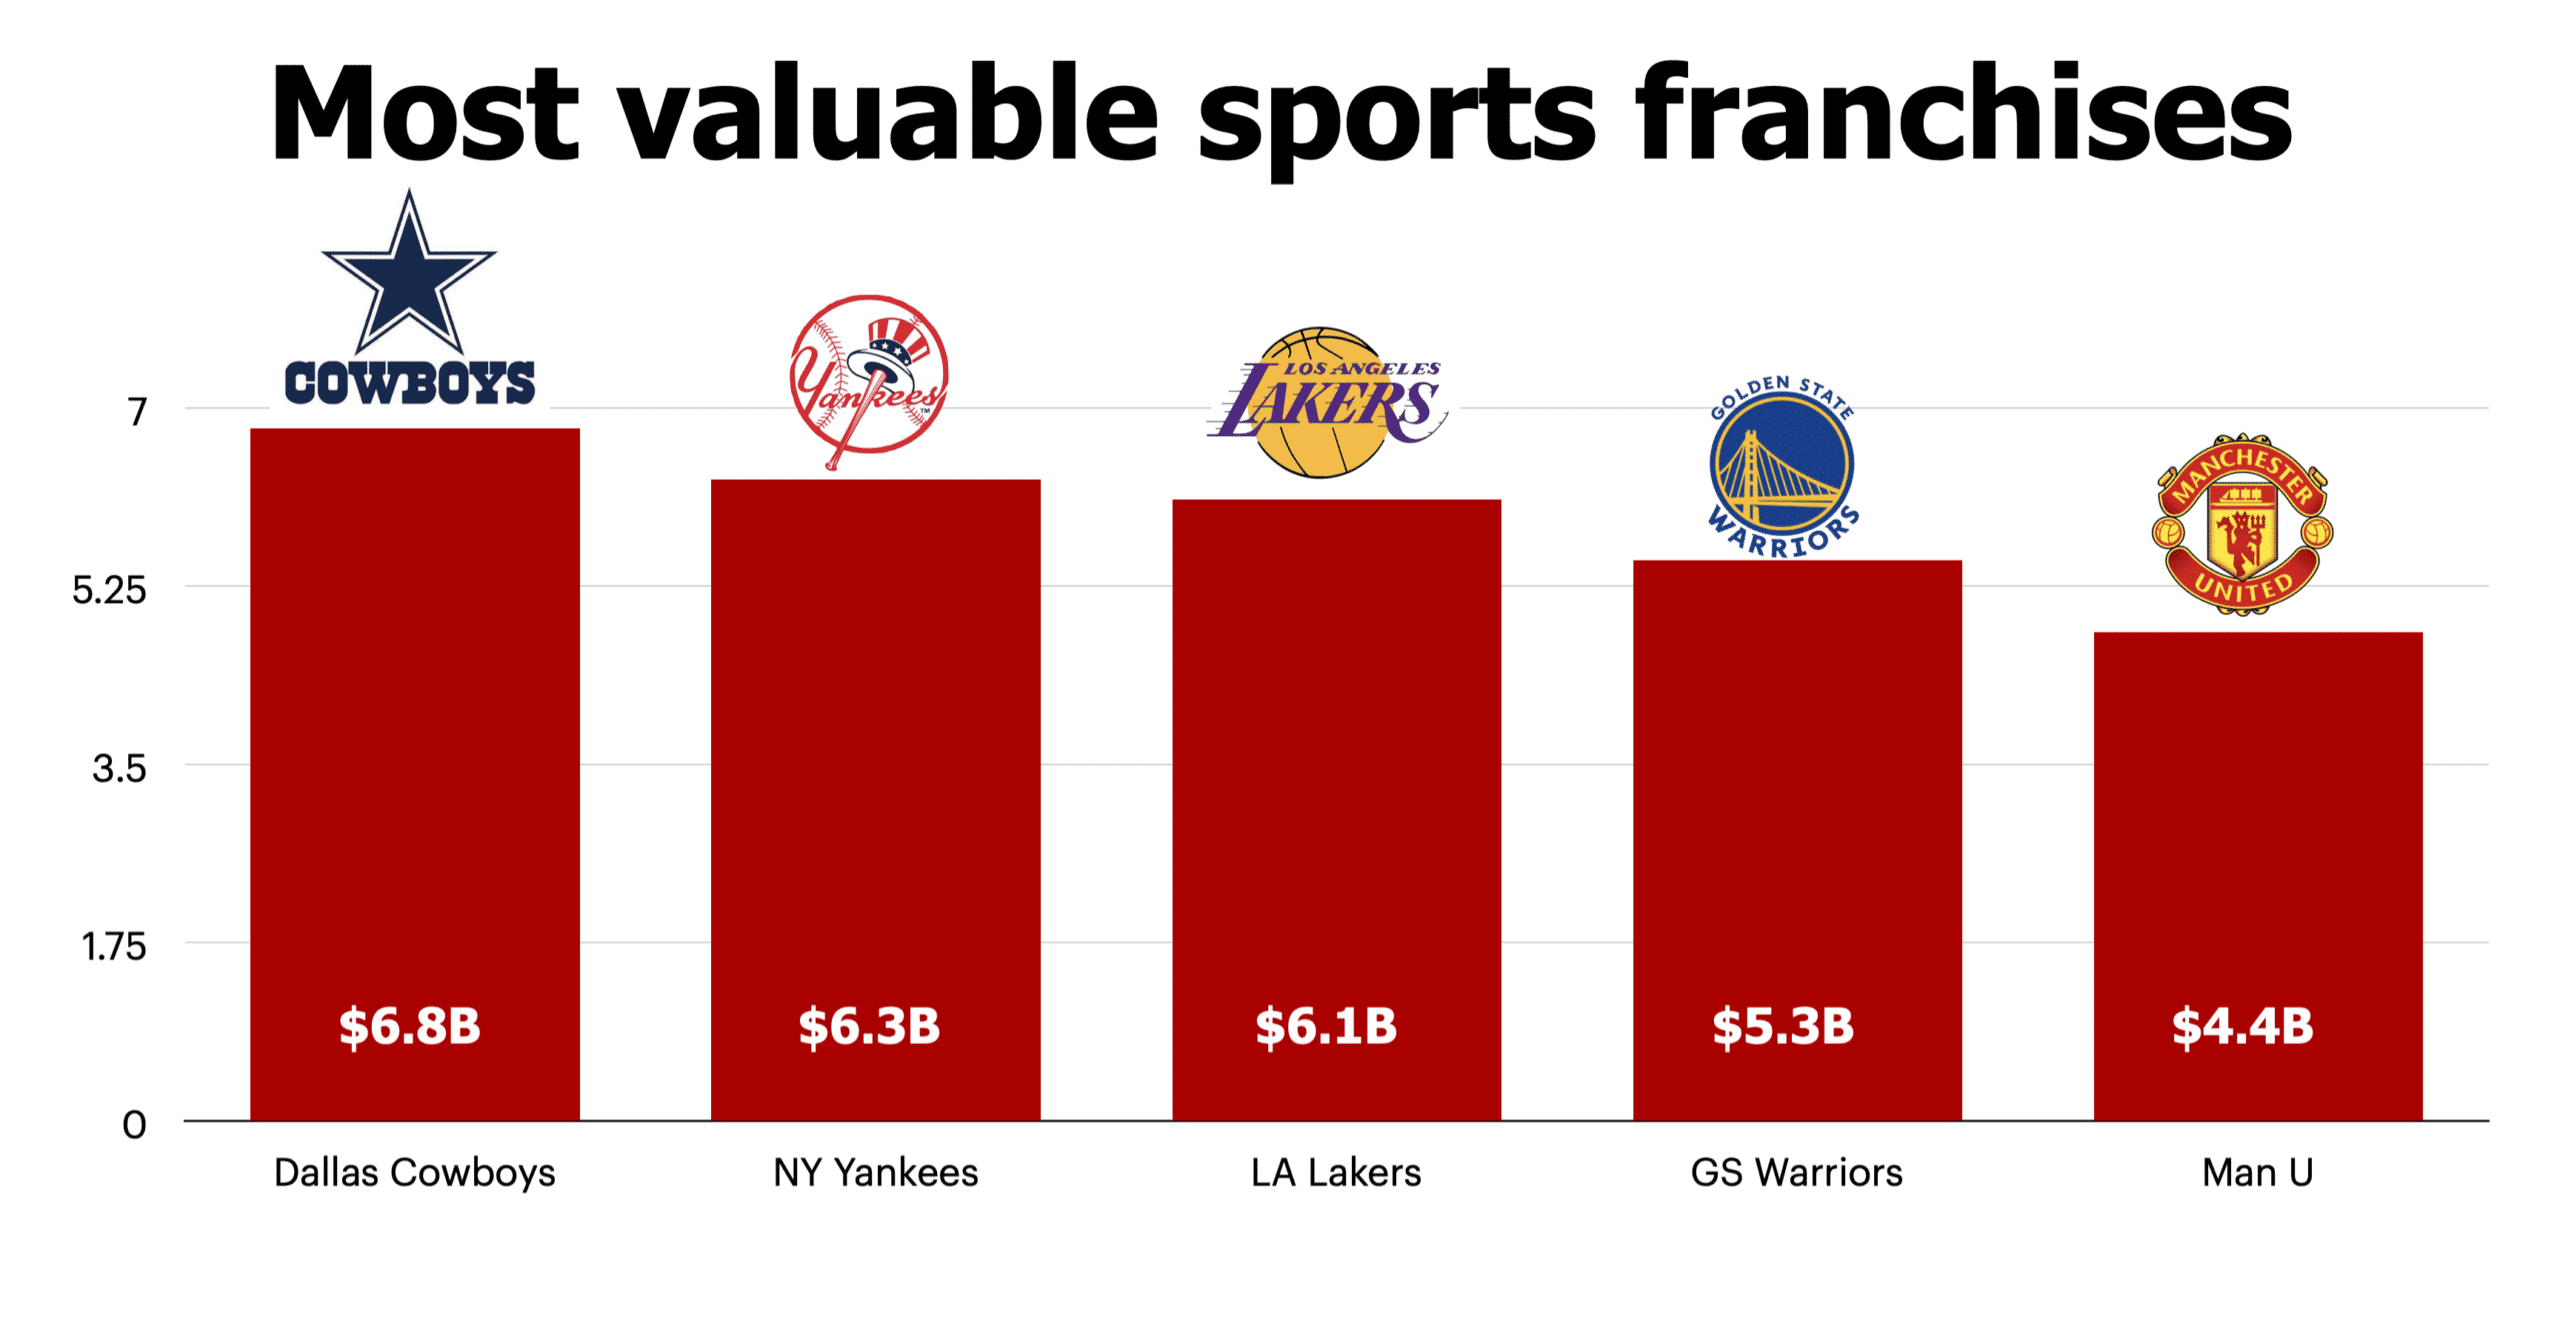 Most Valuable Sports Franchises and highest-paid athletes